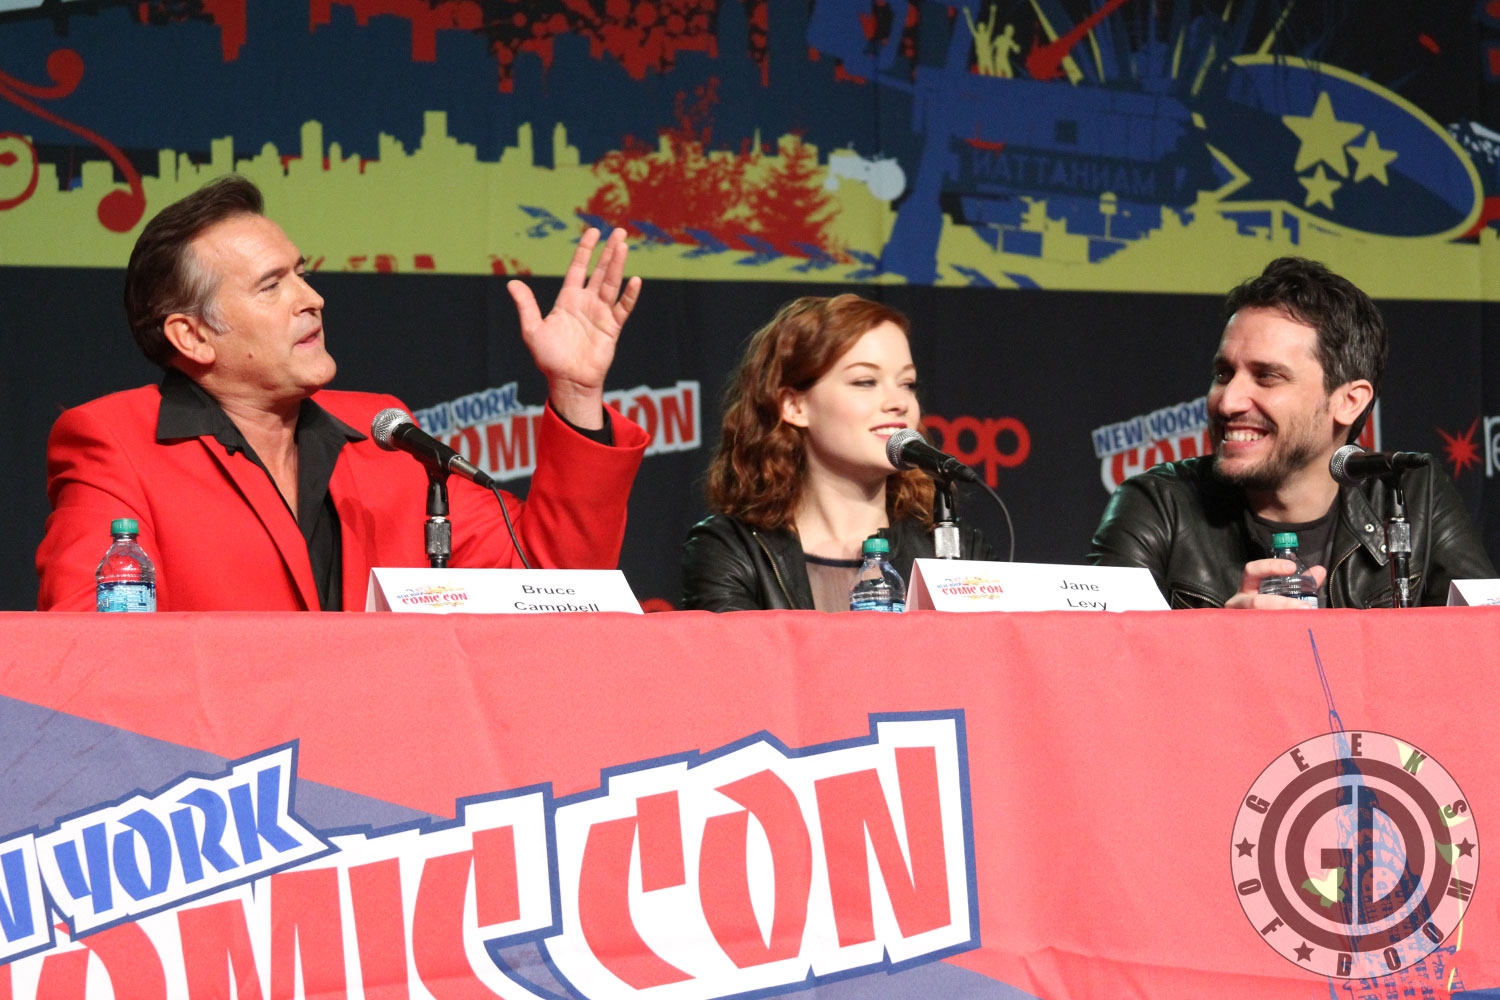 Bruce Campbell, Jane Levy and Fede Alvarez (NY ComicCon, EvilDead Panel)